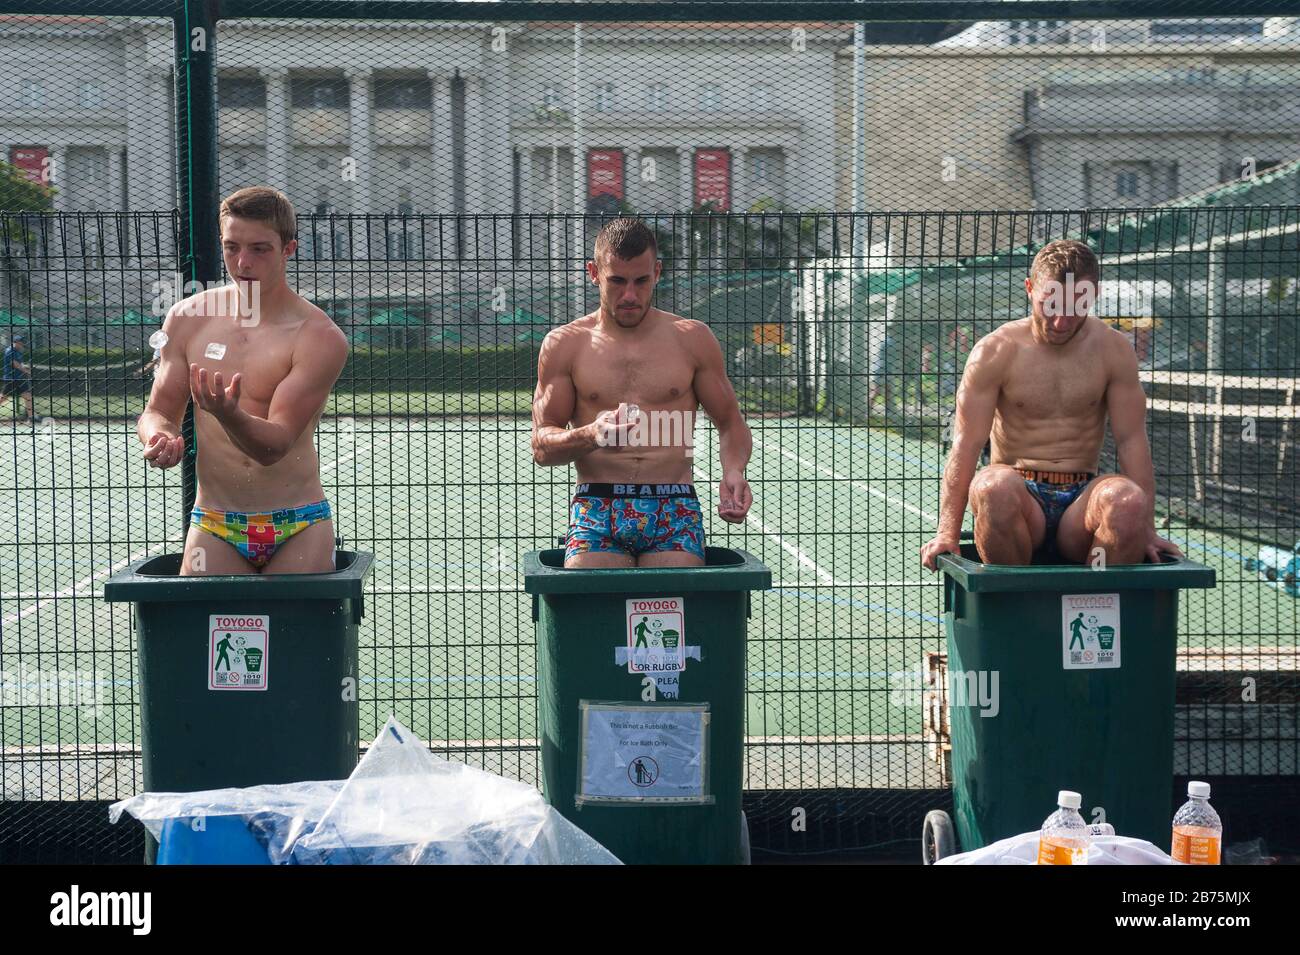 05.11.2017, Singapore, Republic of Singapore, Asia - After a game at the Rugby Sevens tournament, three players of the French rugby team France DT cool down in garbage cans filled with ice water.     Use for editorial purposes only [automated translation] Stock Photo